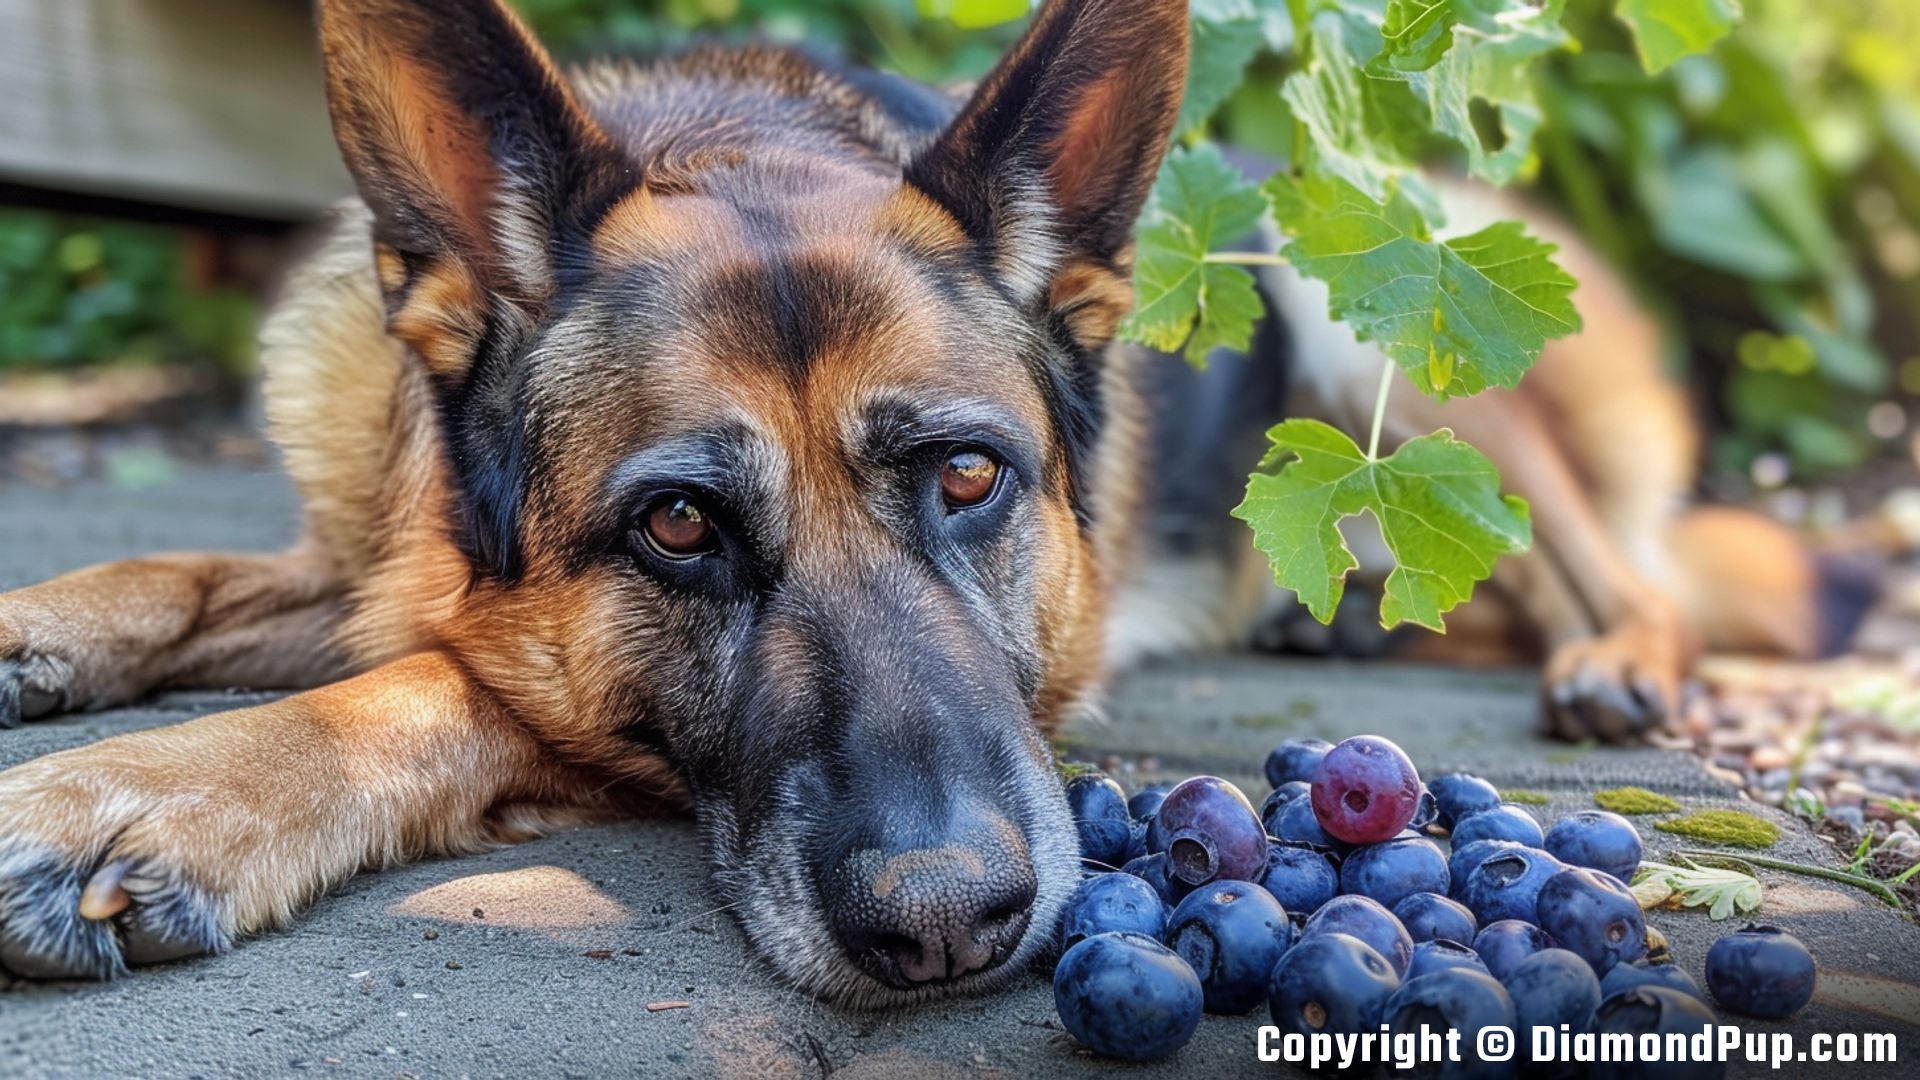 Image of a Playful German Shepherd Snacking on Blueberries